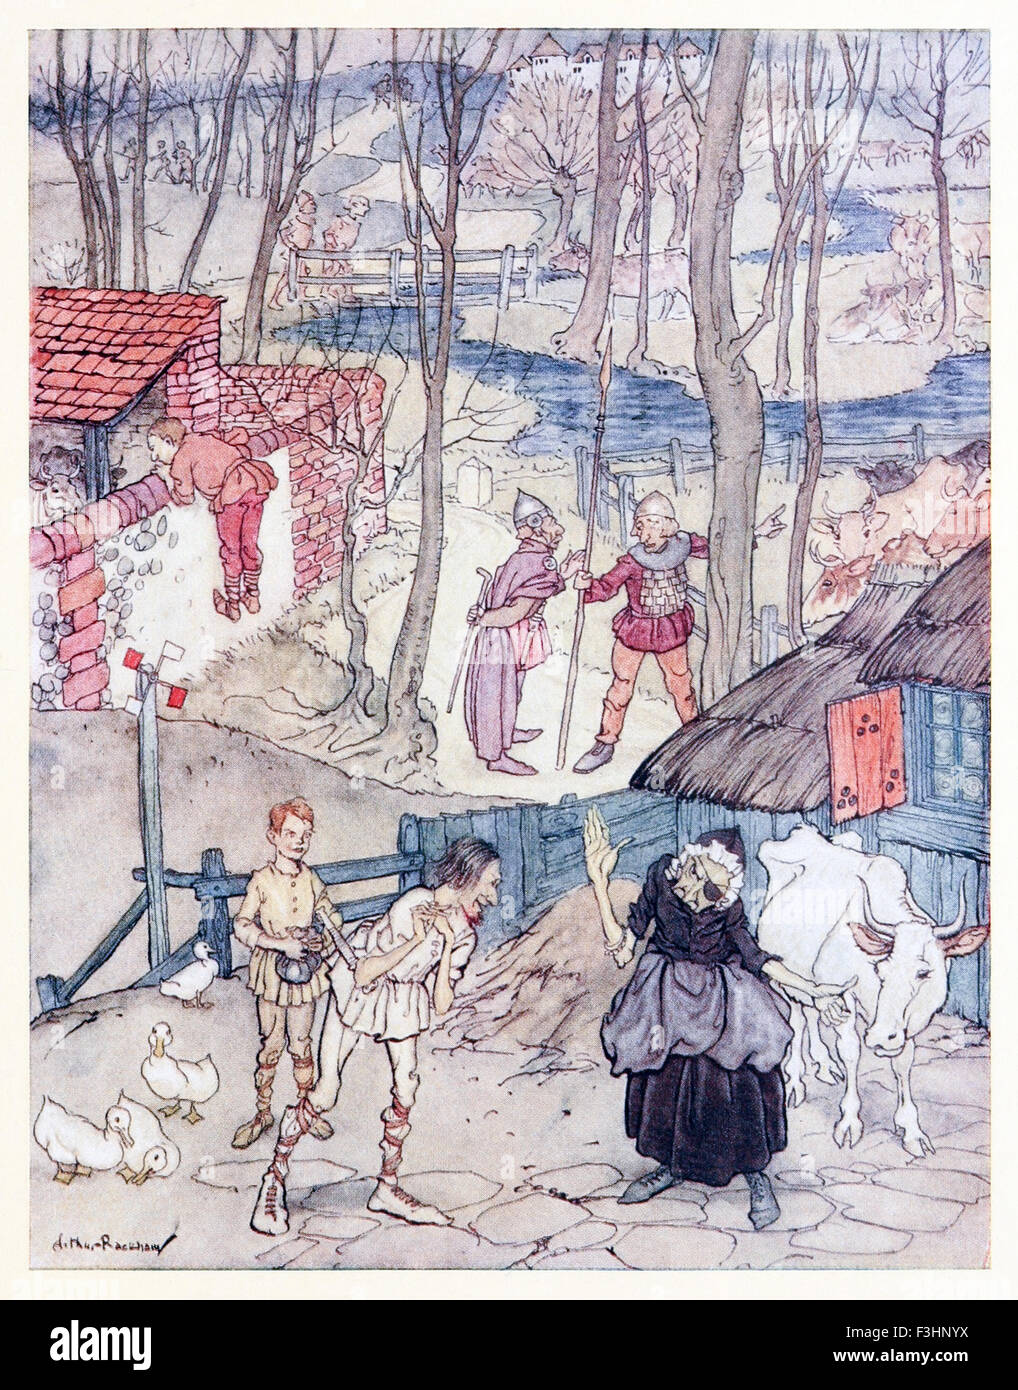 'They offered a cow for each leg of her cow, but she would not accept that offer unless Fiachna went bail for the payment.' from 'Mongan's Frenzy' in 'Irish Fairy Tales', illustration by Arthur Rackham (1867-1939). See description for more information. Stock Photo